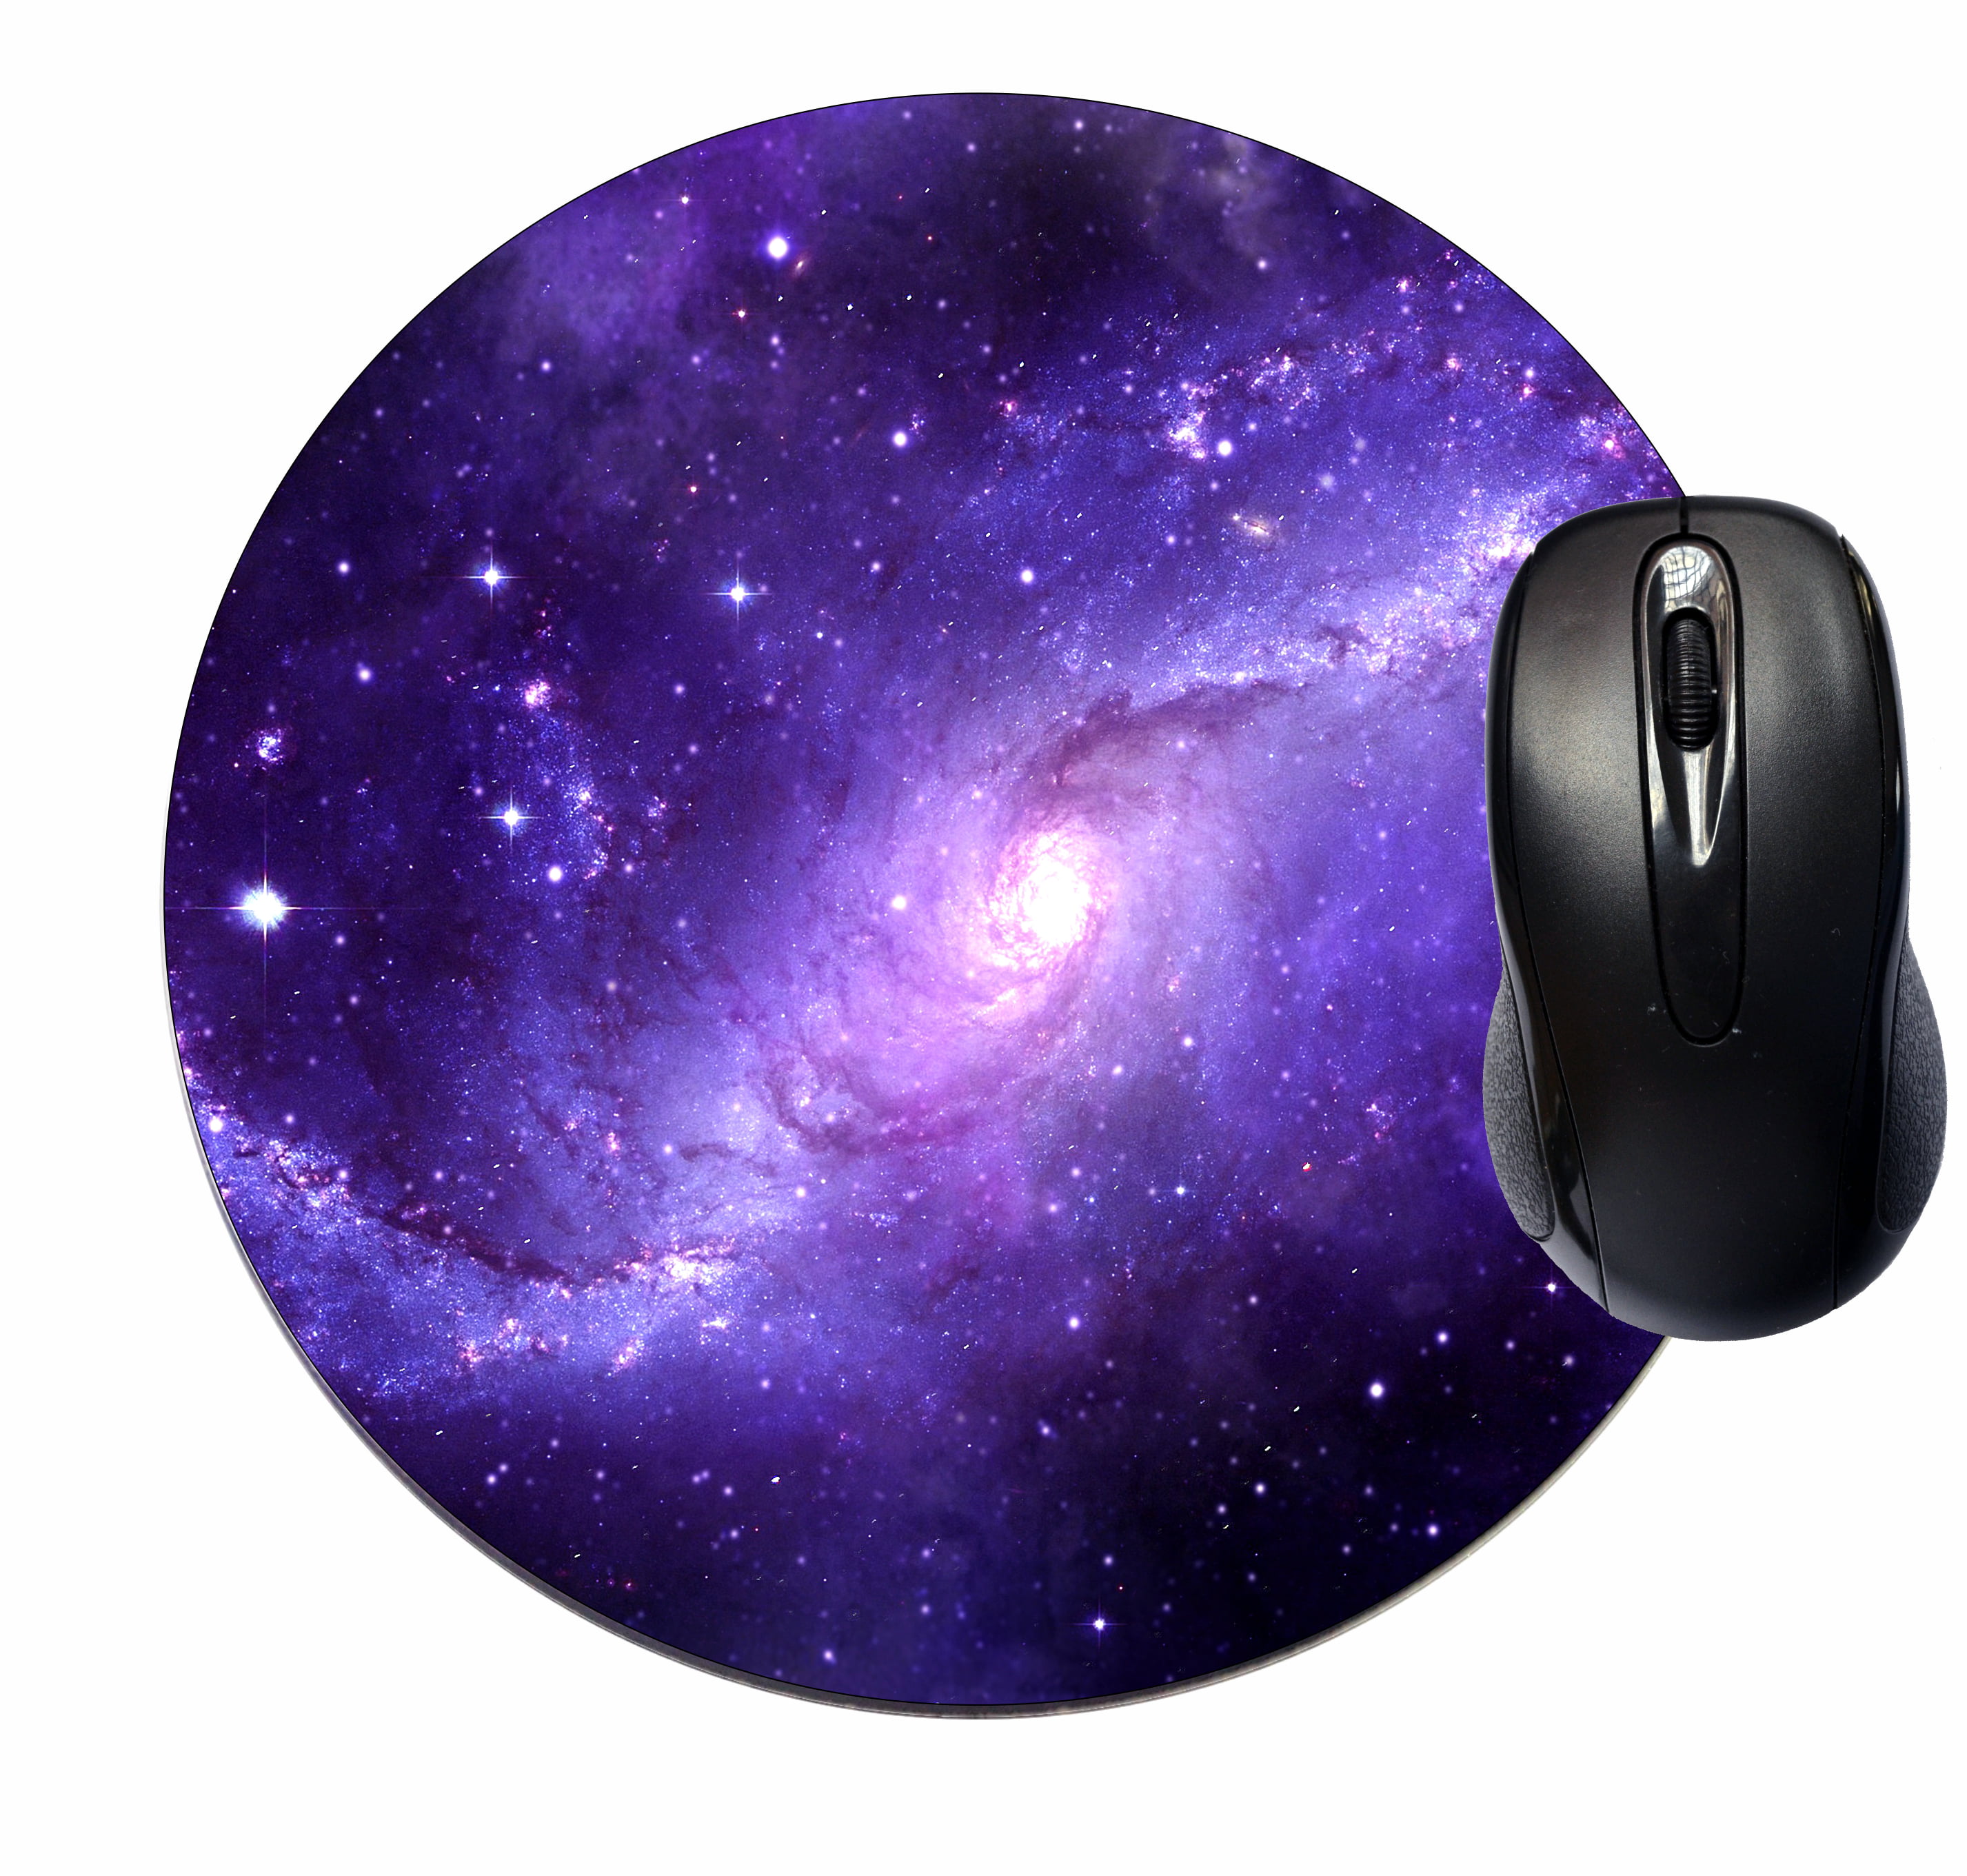 mouse pad cover desk